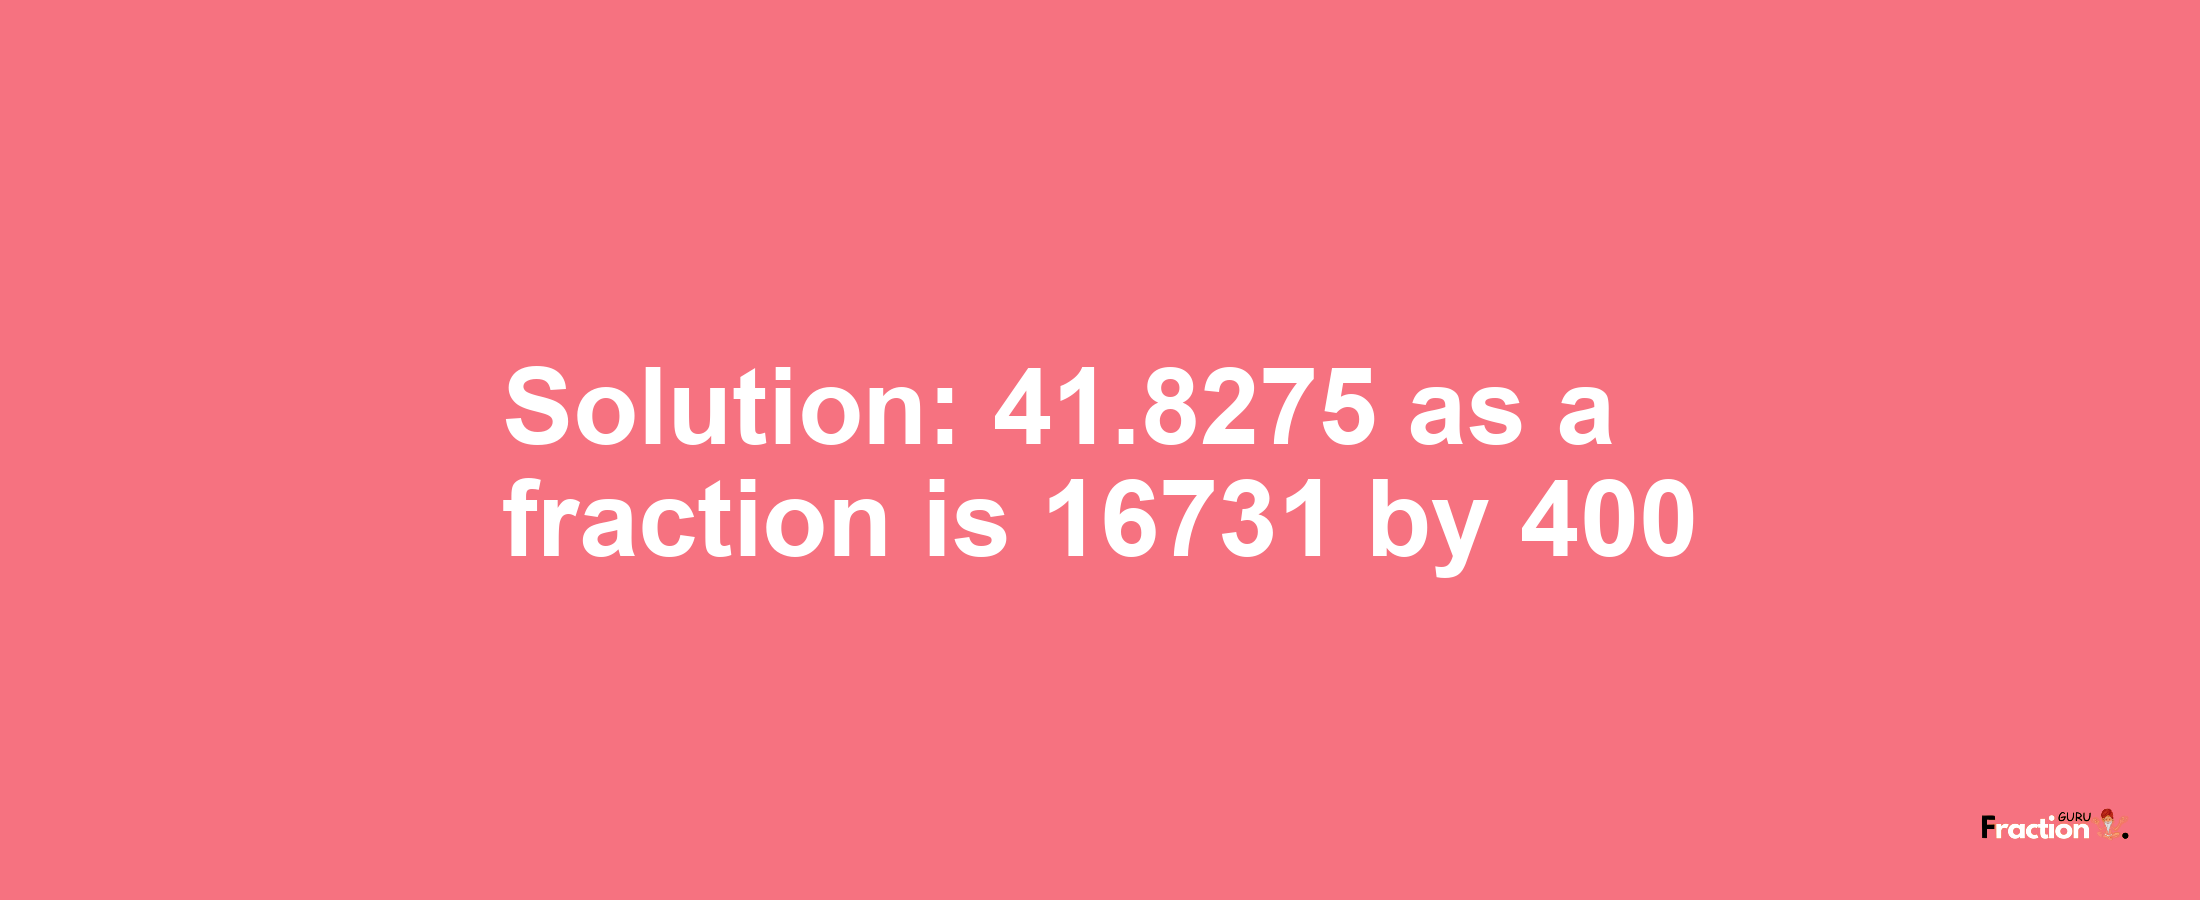 Solution:41.8275 as a fraction is 16731/400